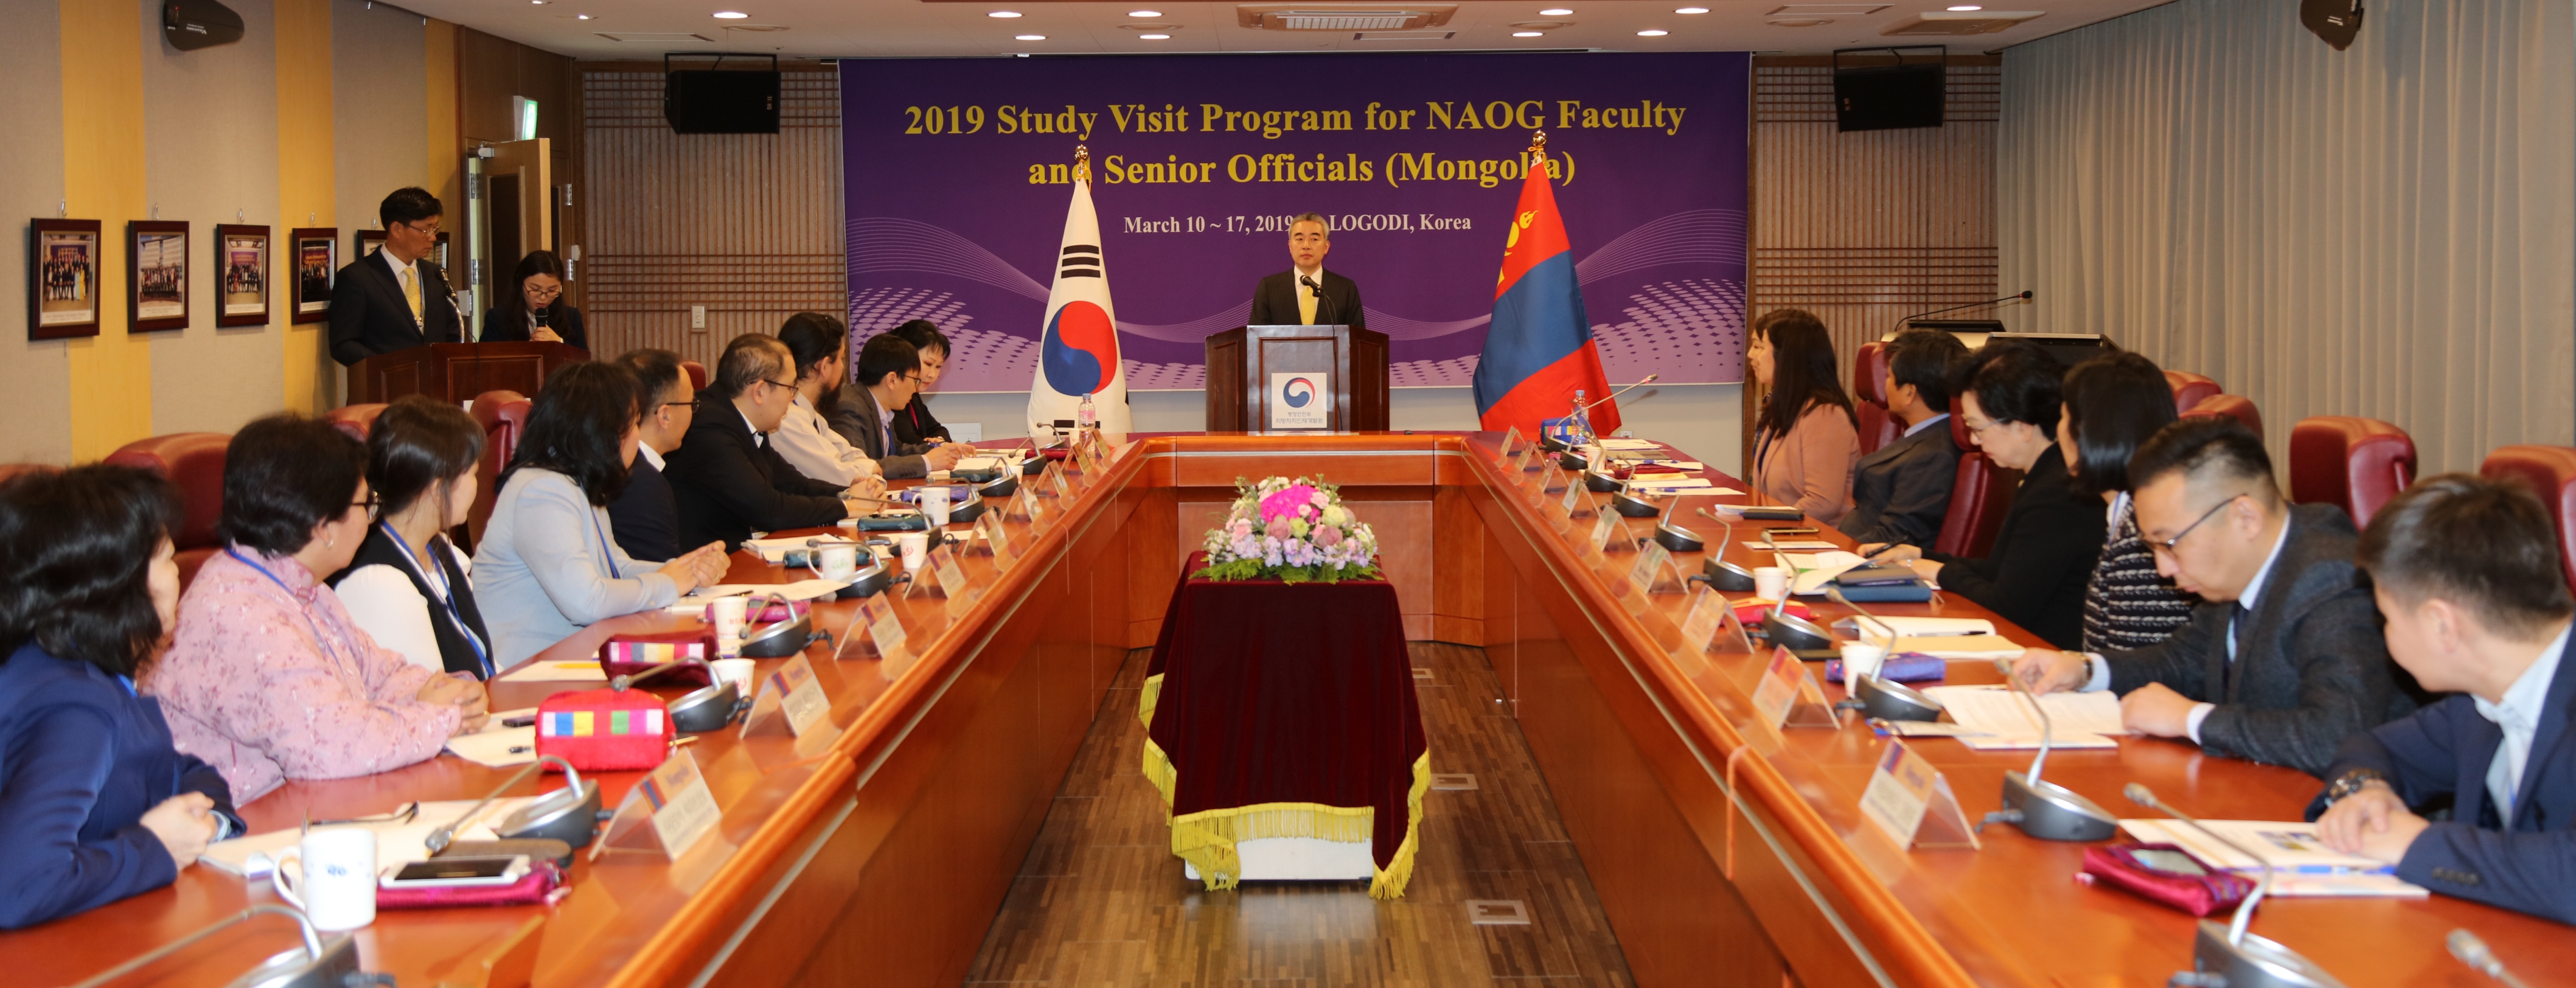 LOGODI President, Mr. Park Jae-min delivers a welcome remarks at the opening ceremony of 'Study Visit Program for NAOG Faculty and Senior Officials from Mongolia'